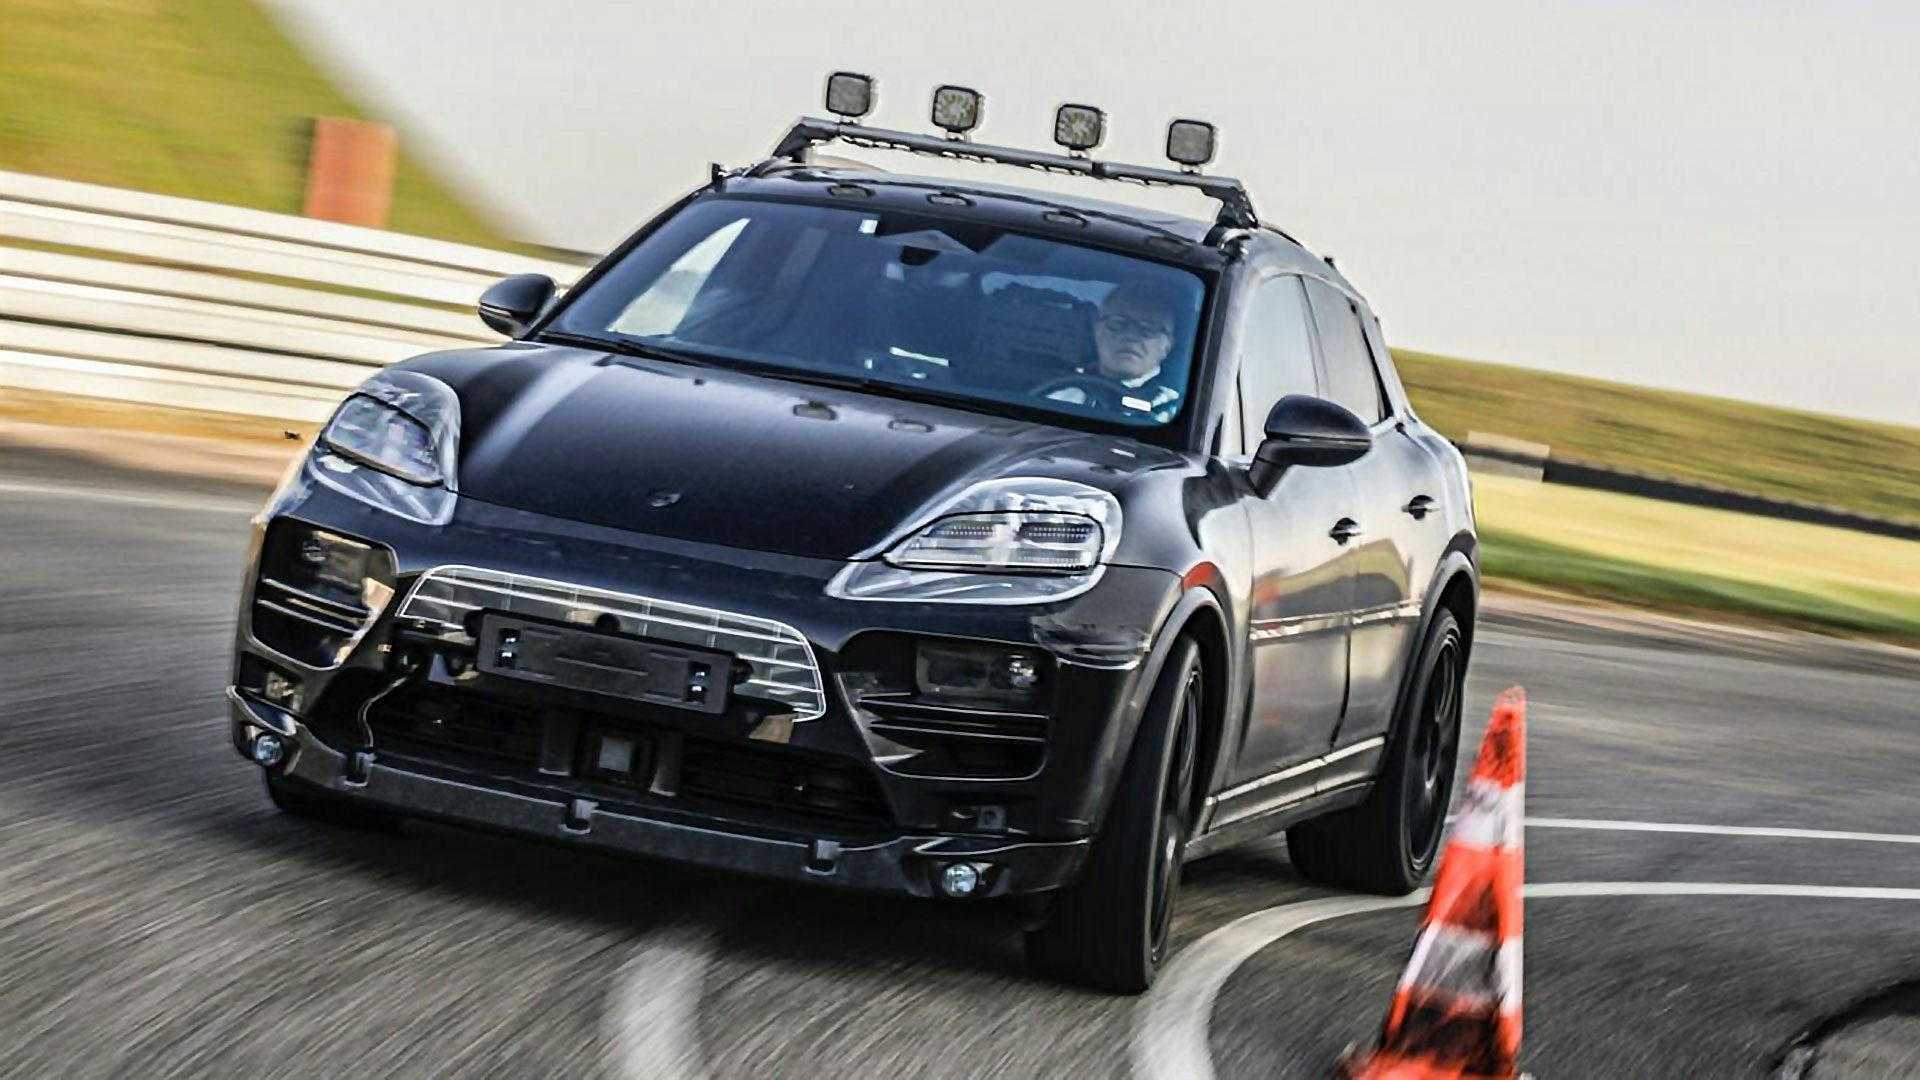 New 2023 electric Porsche Macan teased here's what we know so far carwow